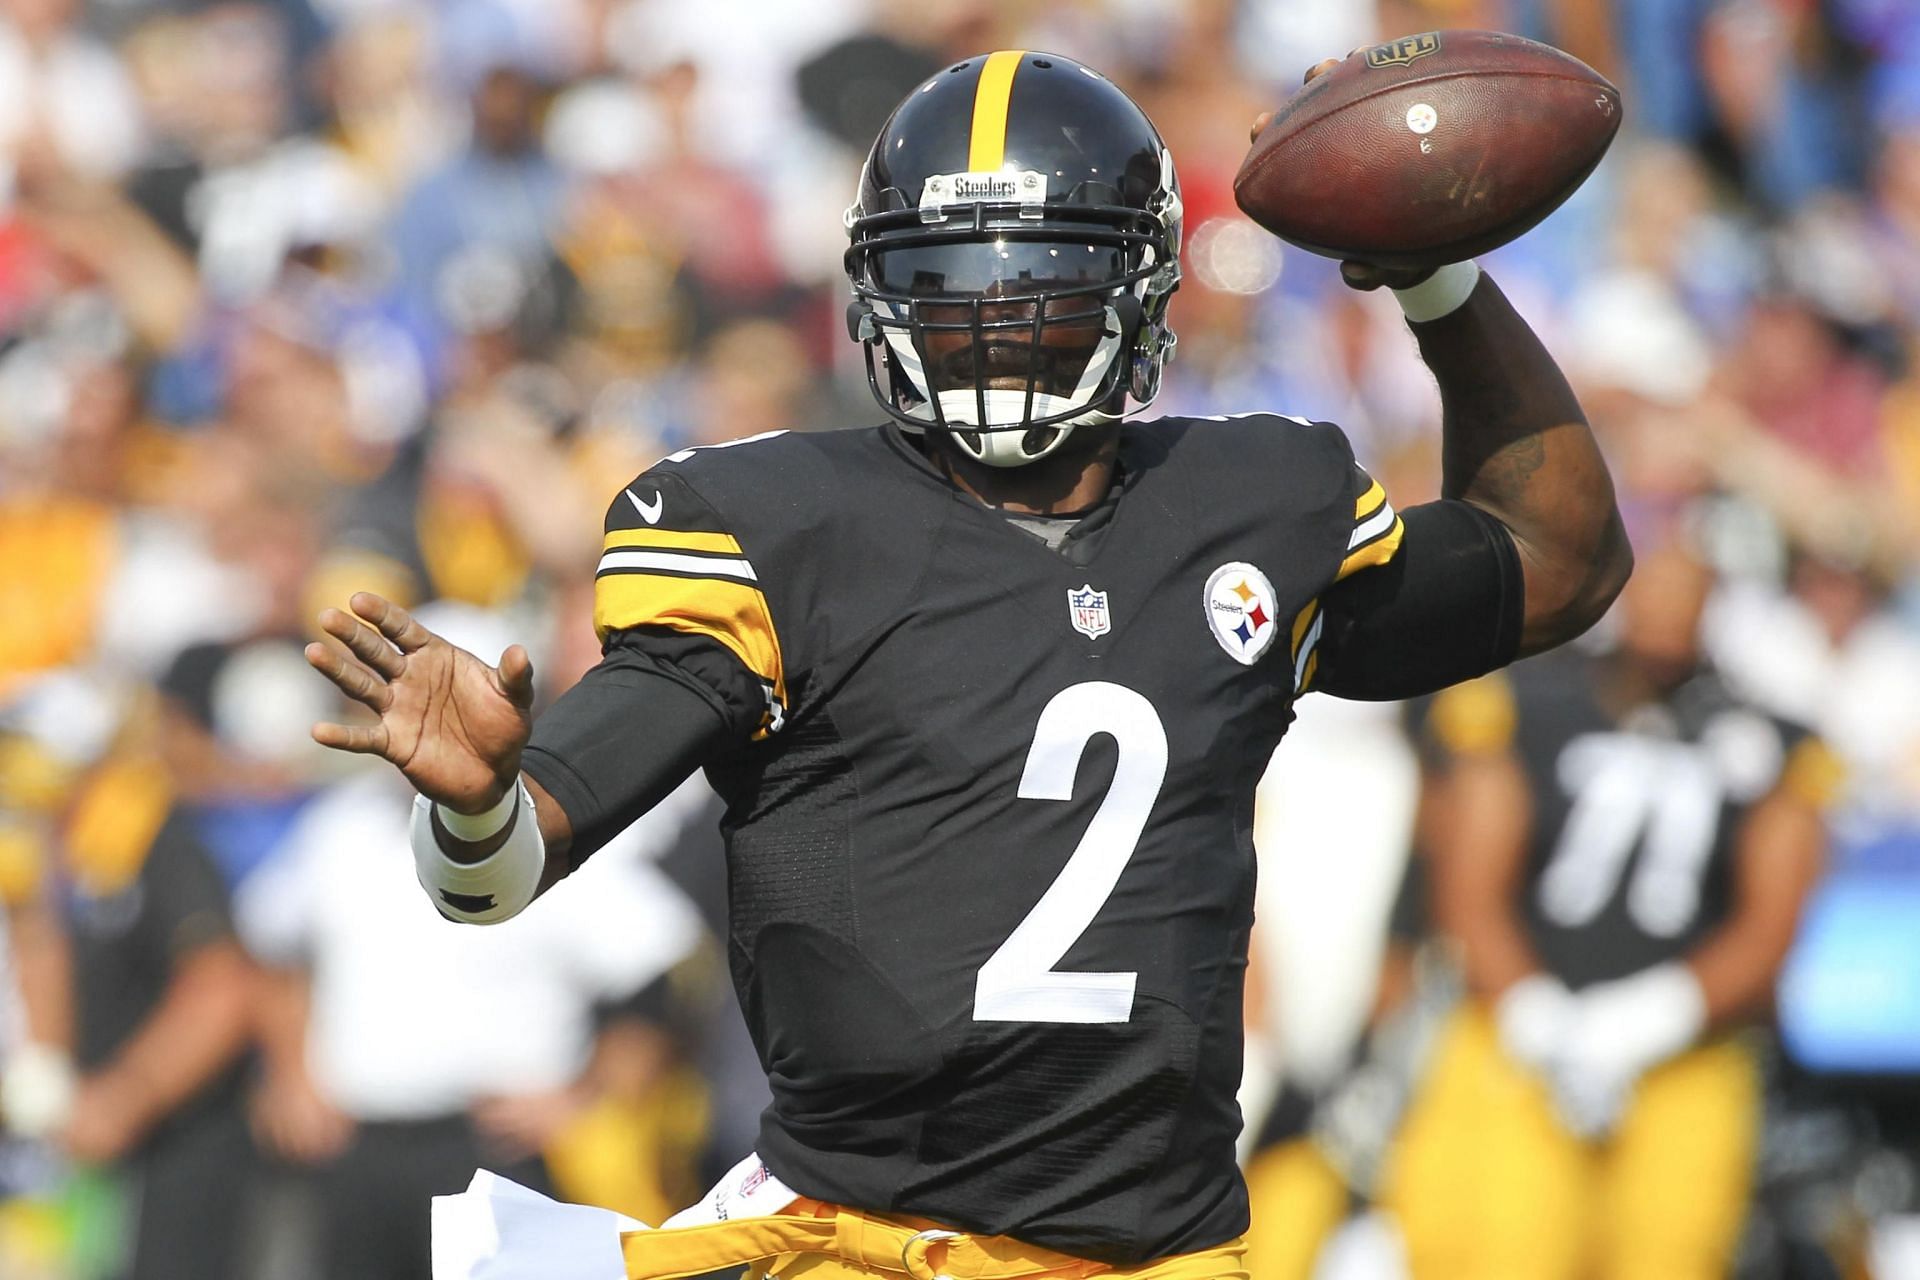 Michael Vick in action for the Pittsburgh Steelers